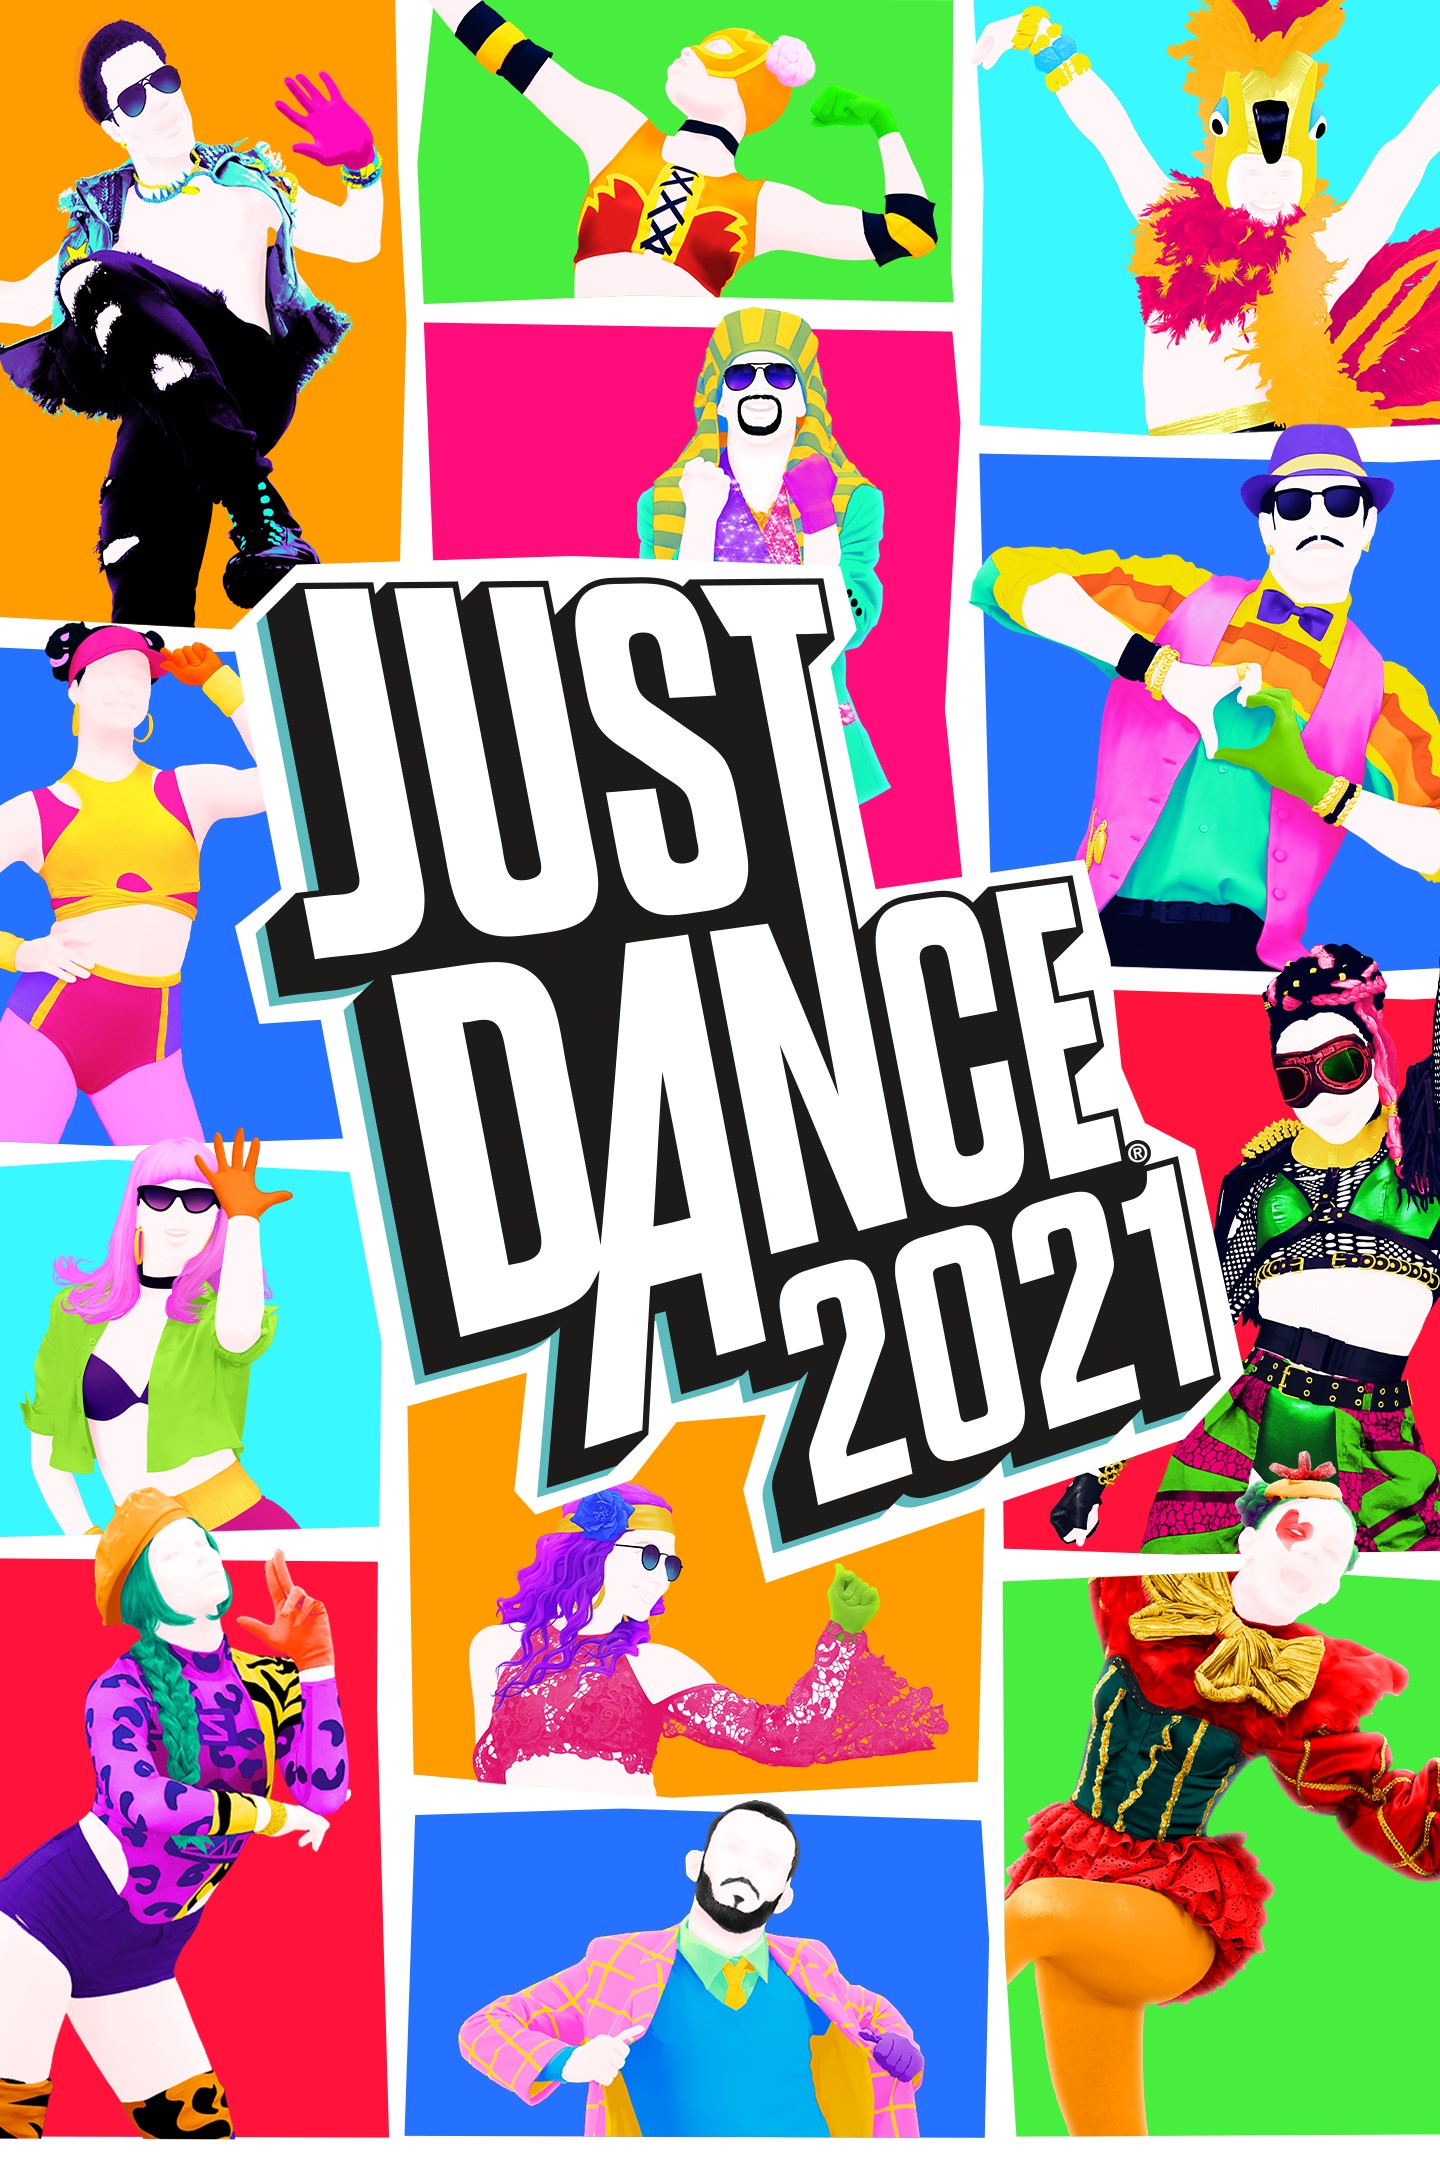 Master the Moves: How to Play Just Dance 2021 on Xbox Series X